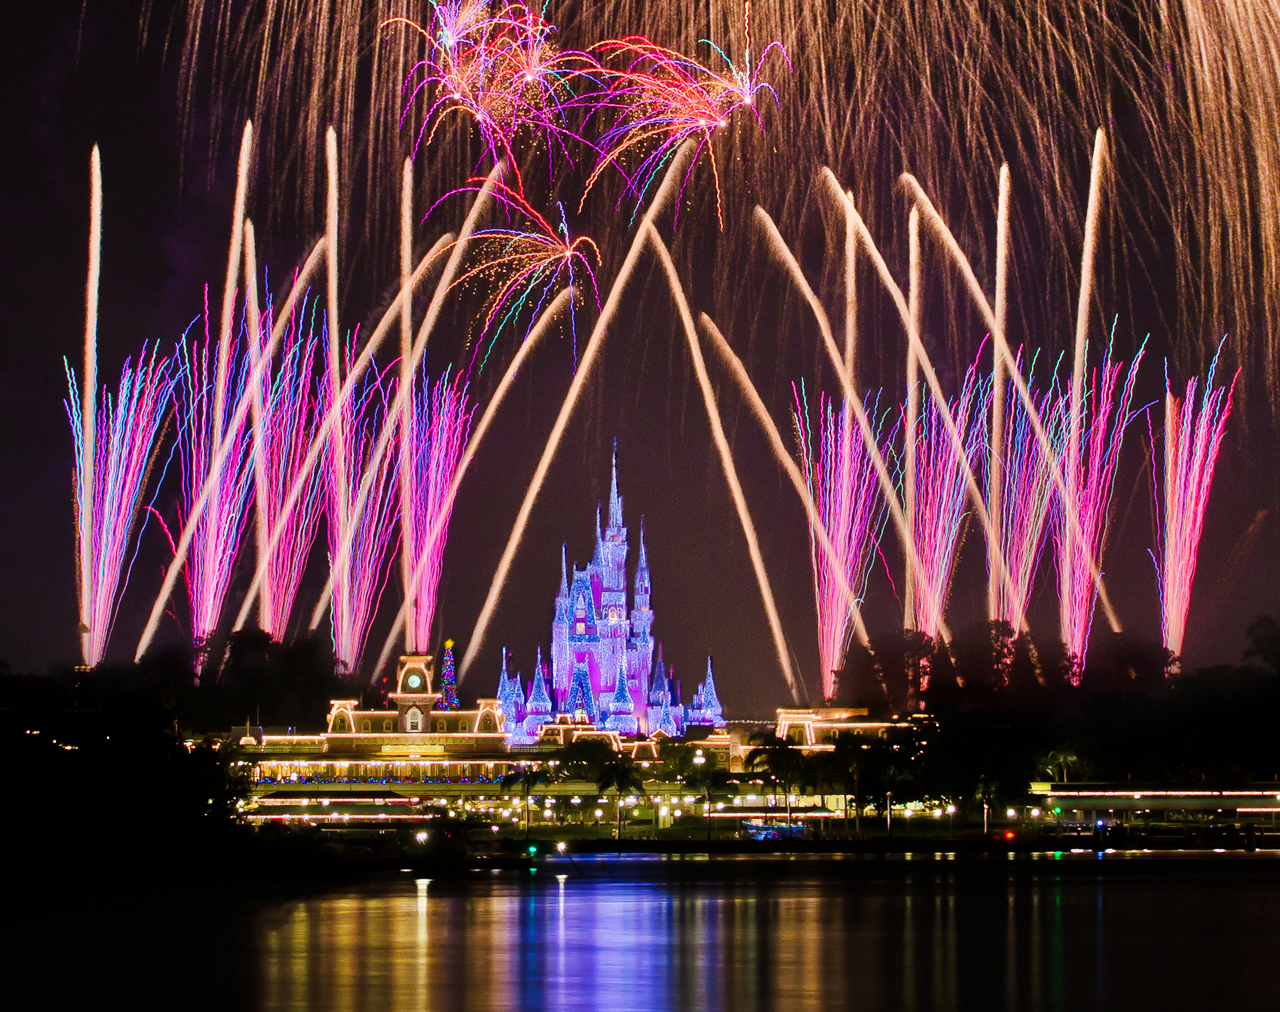 Wishes Dreams